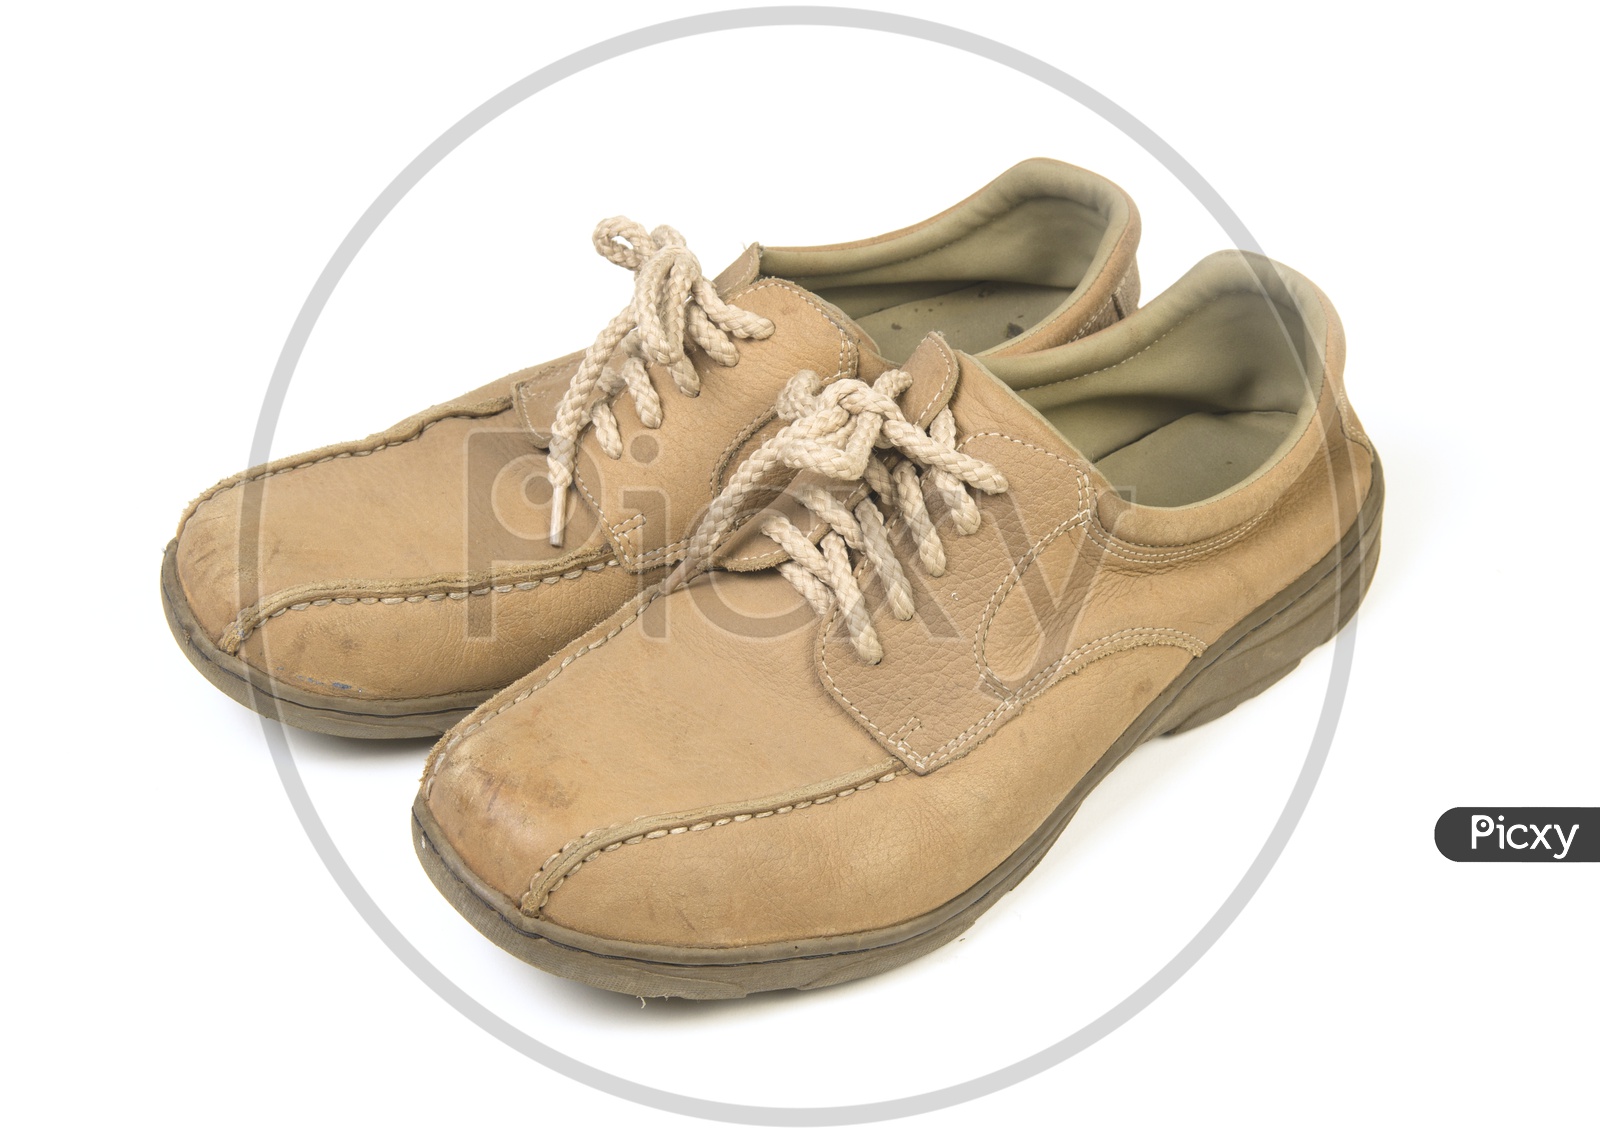 Brown man's shoes isolated on white background